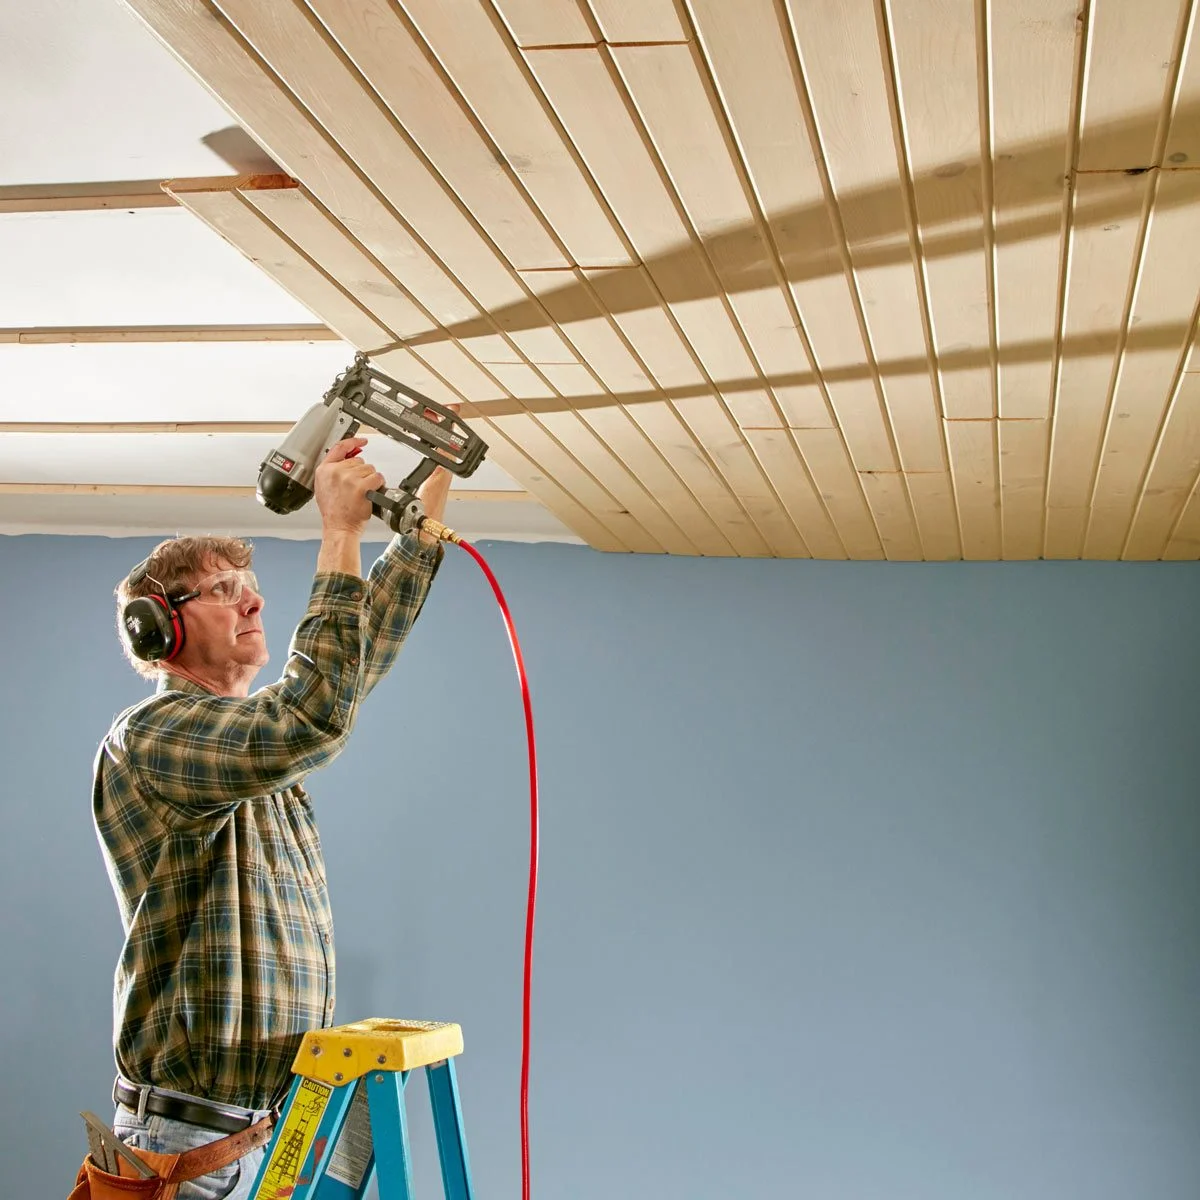 Installing Ceiling Tongue and Groove Planks